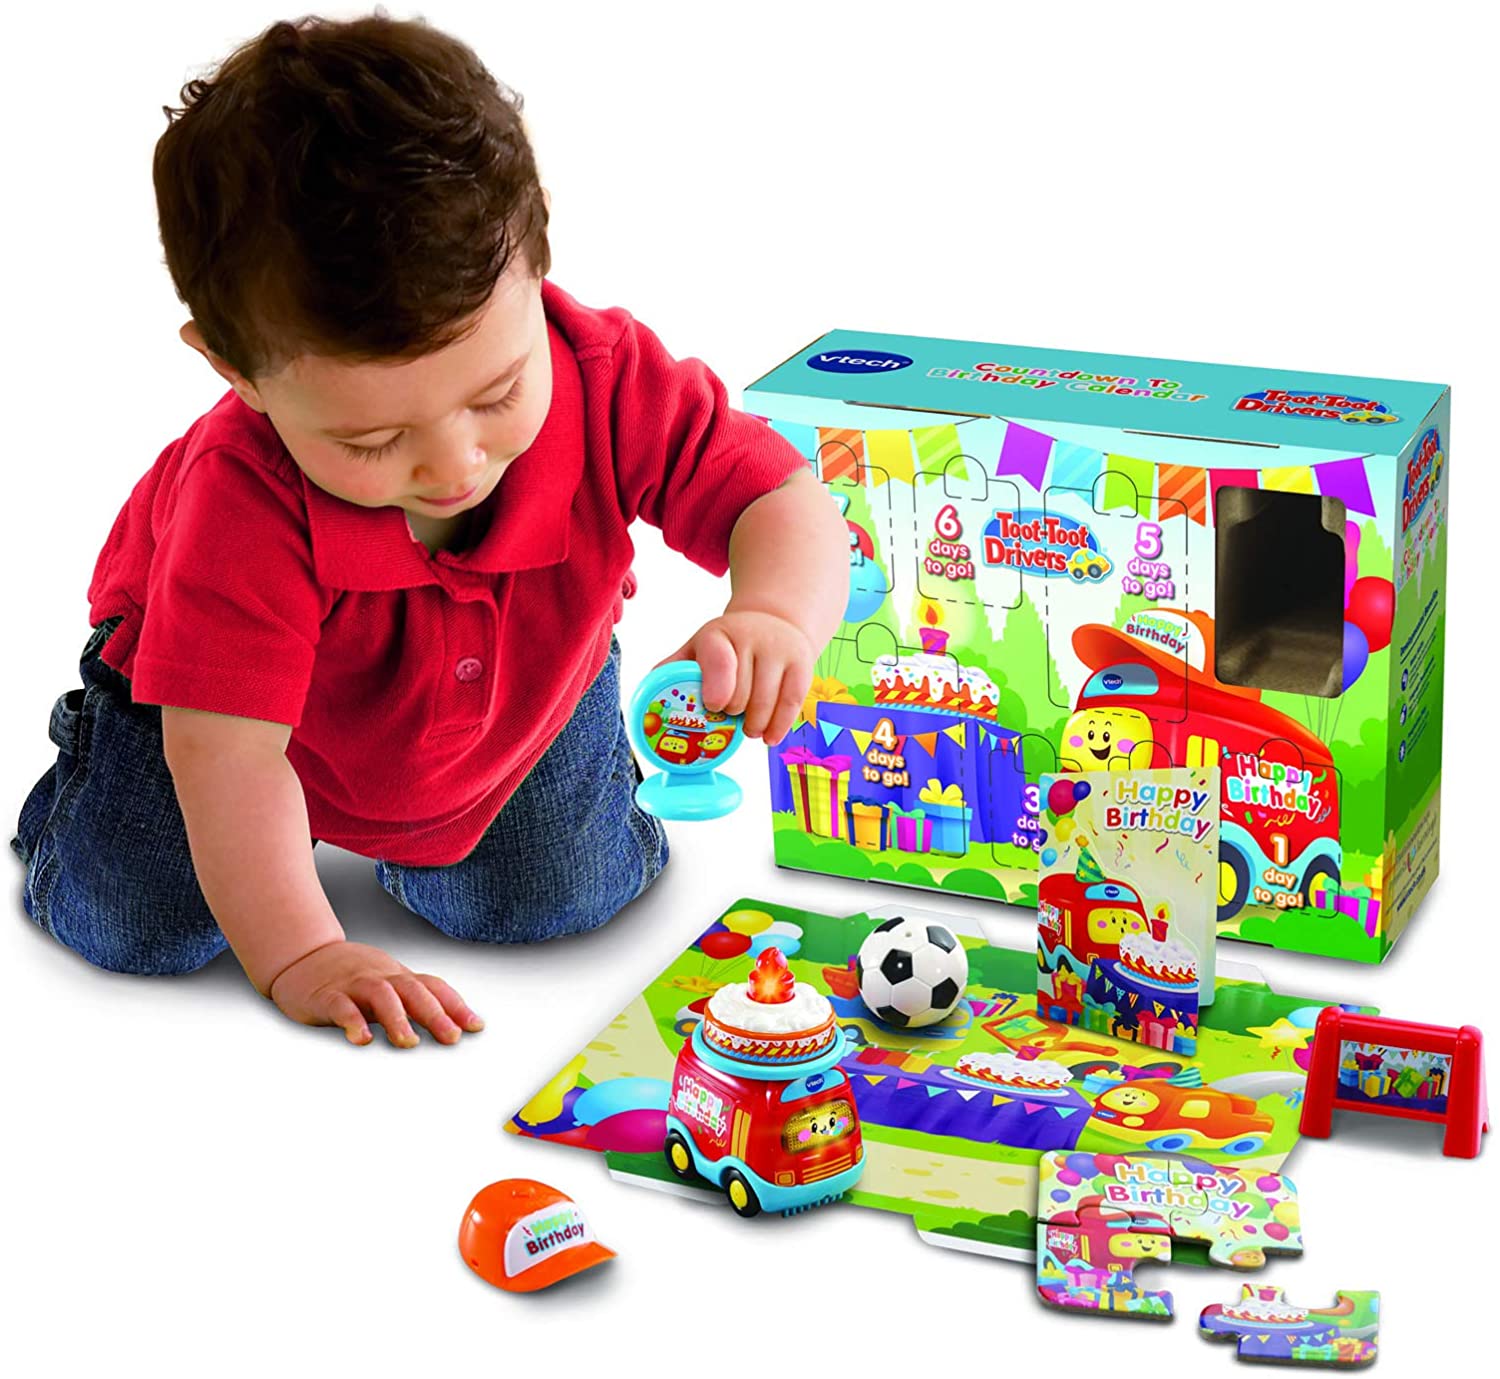 Vtech Toot Toot Countdown To Birthday (80-509503)